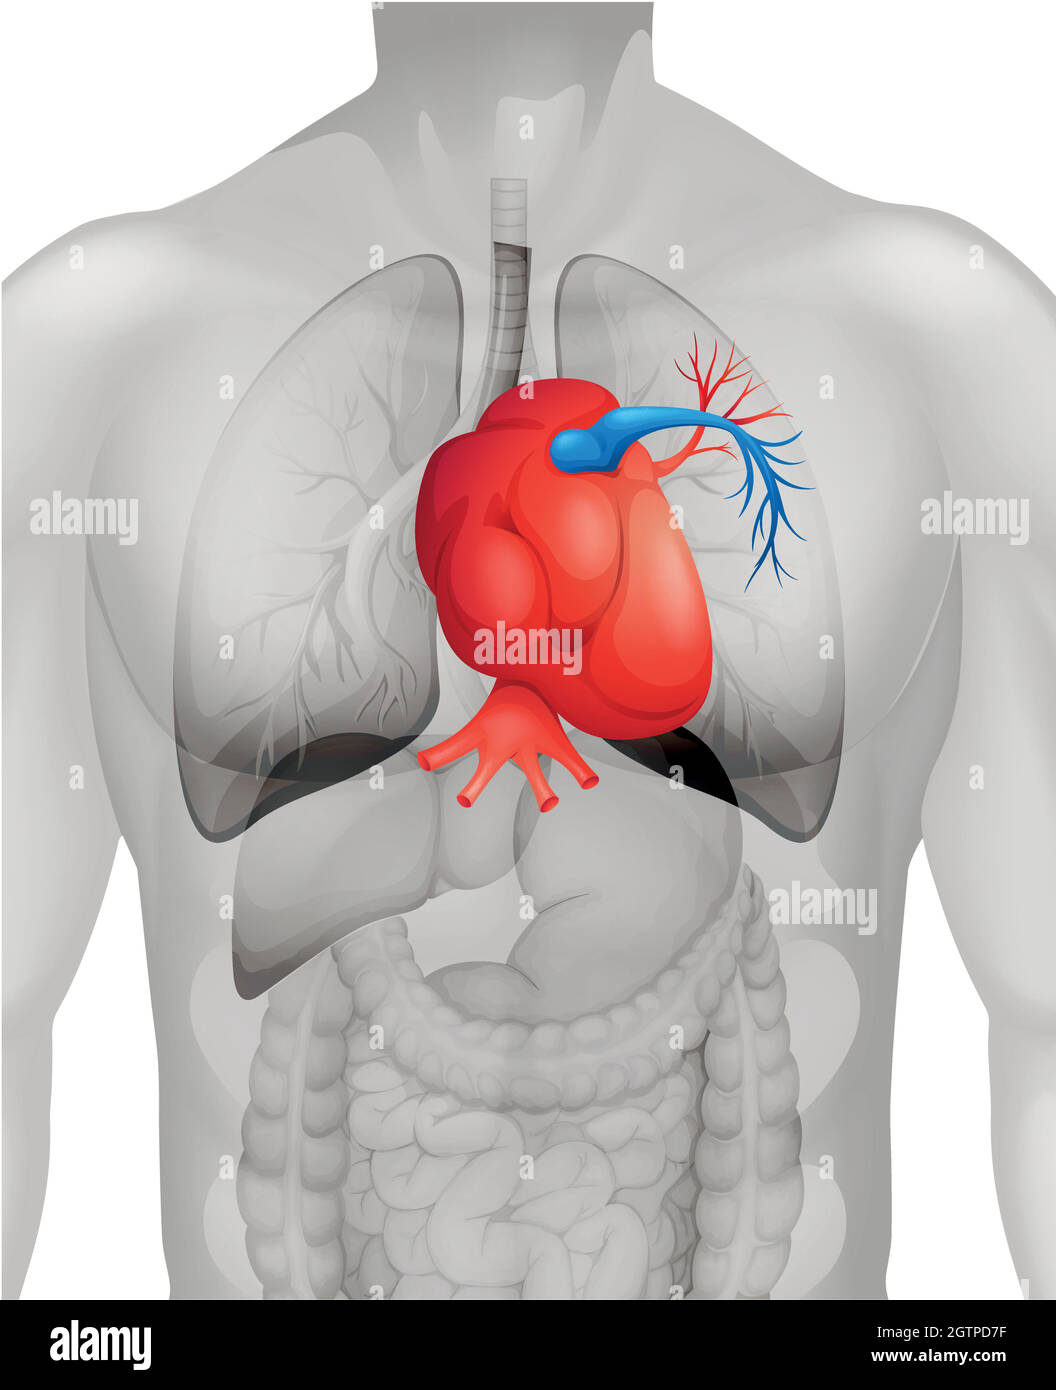 Human Heart Diagram High Resolution Stock Photography and Images - Alamy